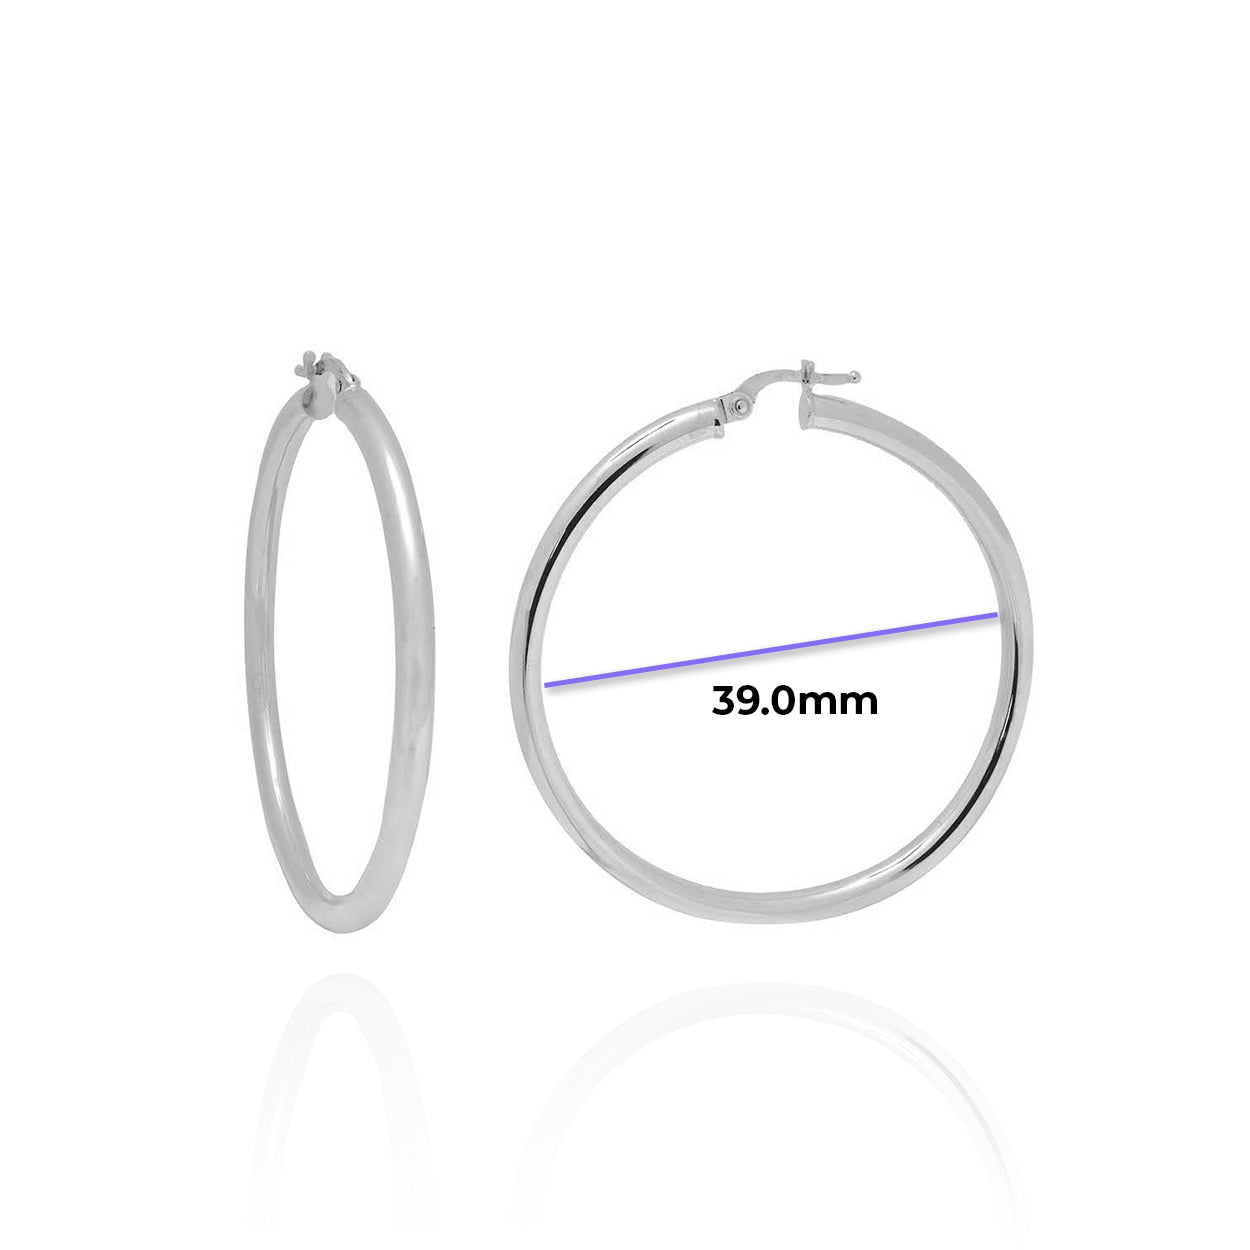 XL 2mm Tube Solid Gold Hoops White with Measurement 39.0mm